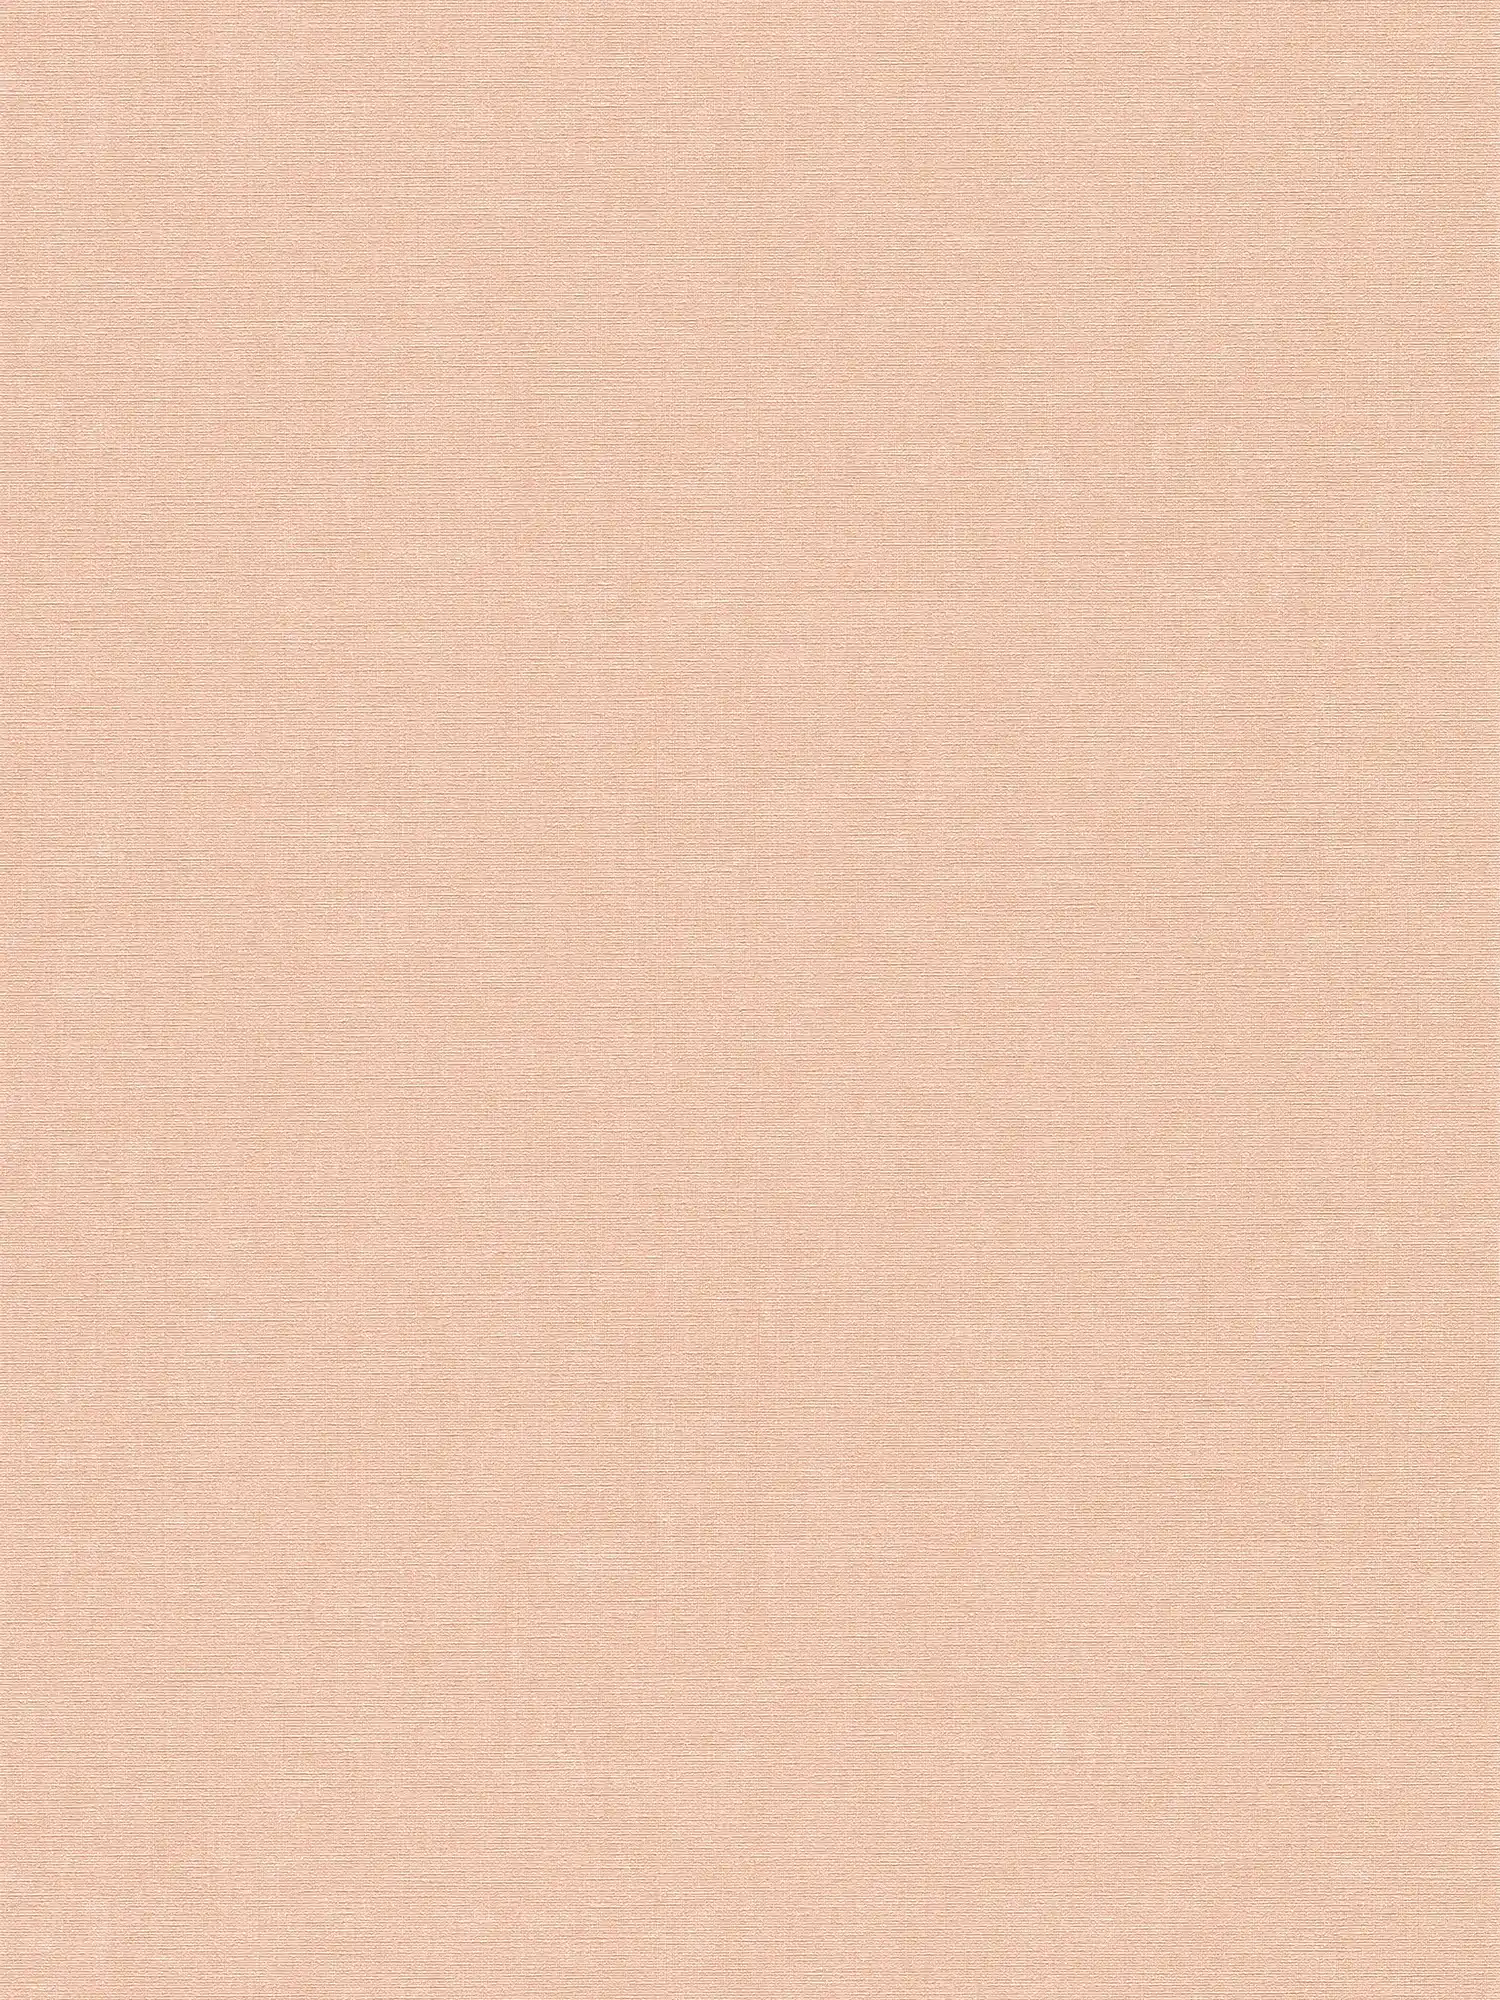 Pink wallpaper plain and mottled with texture embossing
